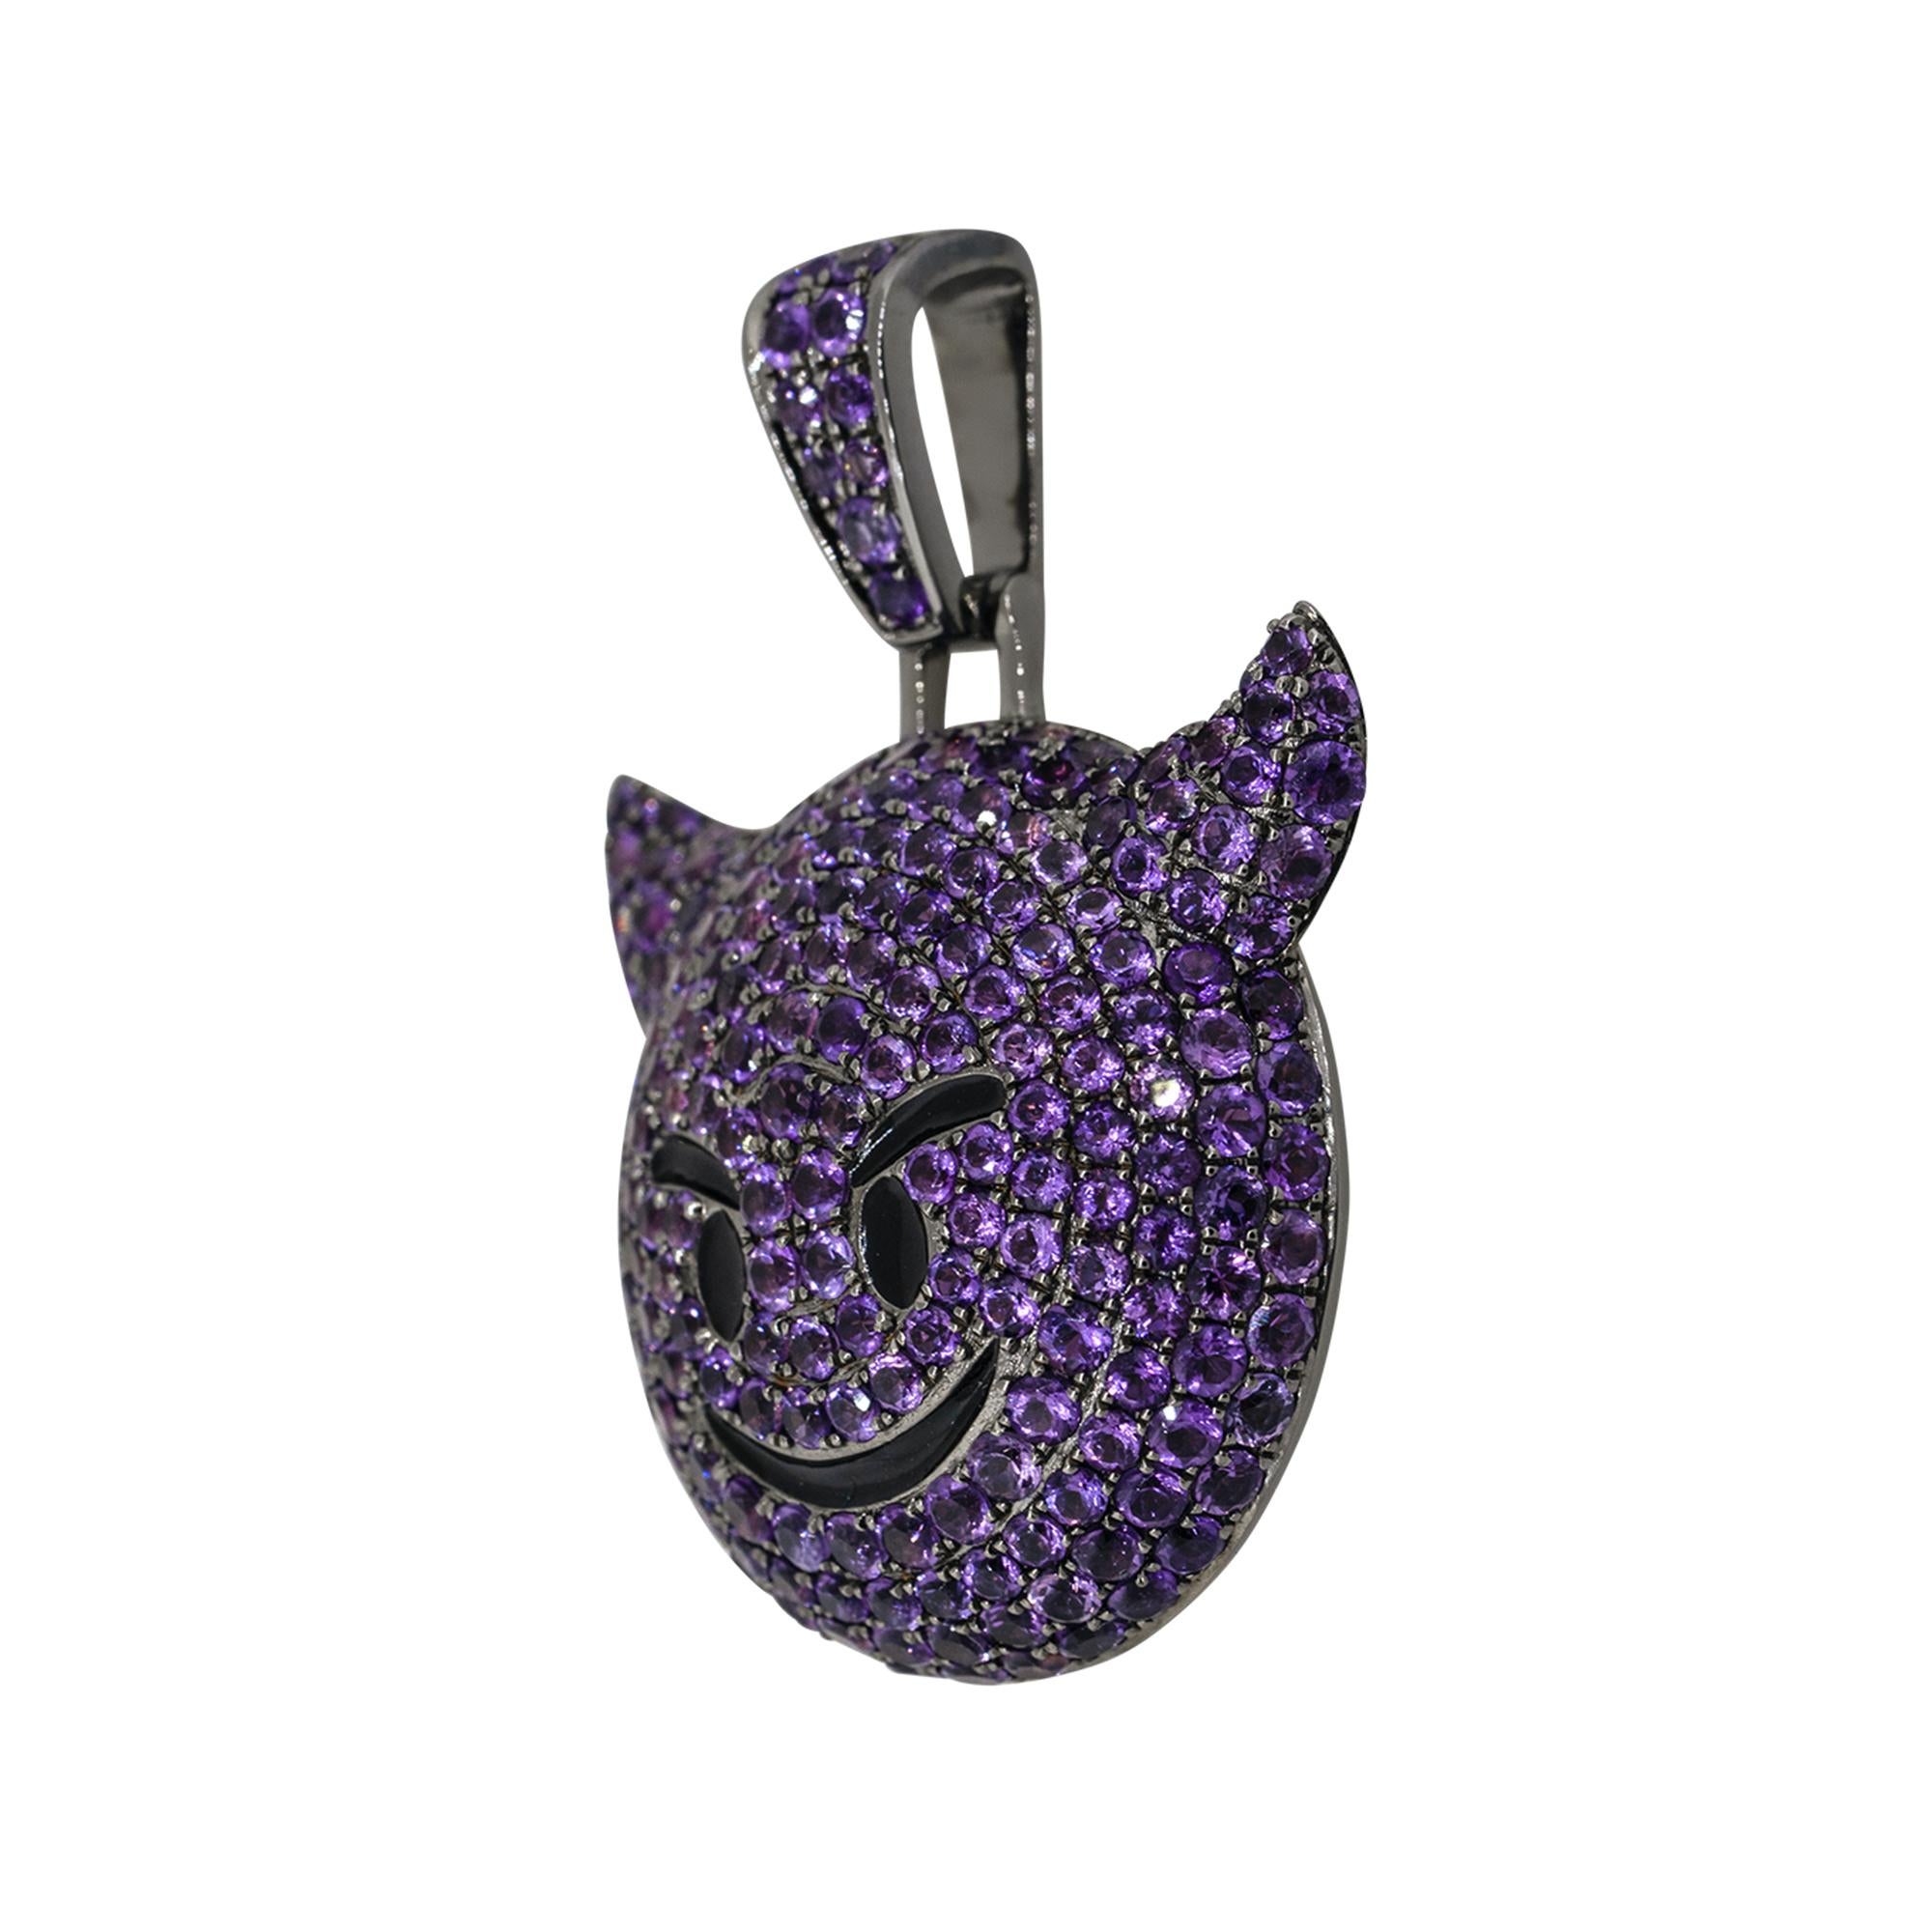 Material: 14k Black gold
Gemstone Details: Approx. 5.63ctw of round cut Amethyst gemstones
Total Weight: 13.5g (8.7dwt
Measurements: 30mm x 10mm x 40mm
Additional Details: This item comes with a Presentation Box!
SKU: A30313716